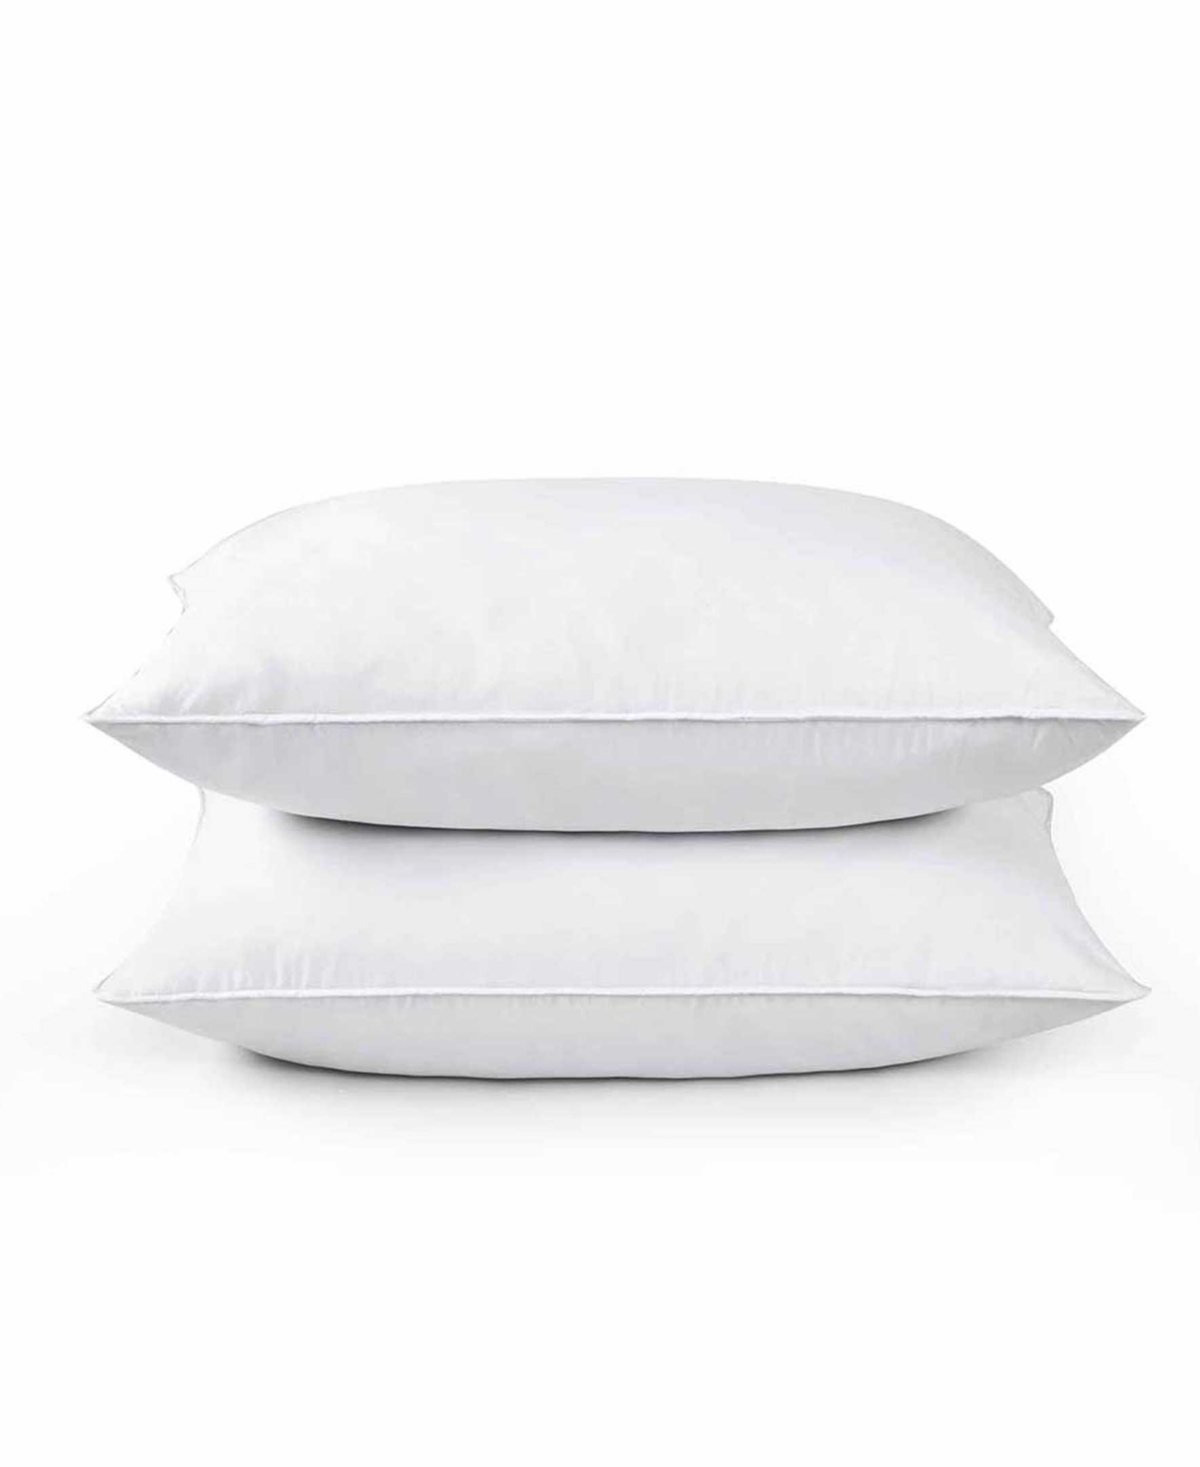 Unikome Medium Firm Goose Feather And Down Pillows, 2-pack Standard In White